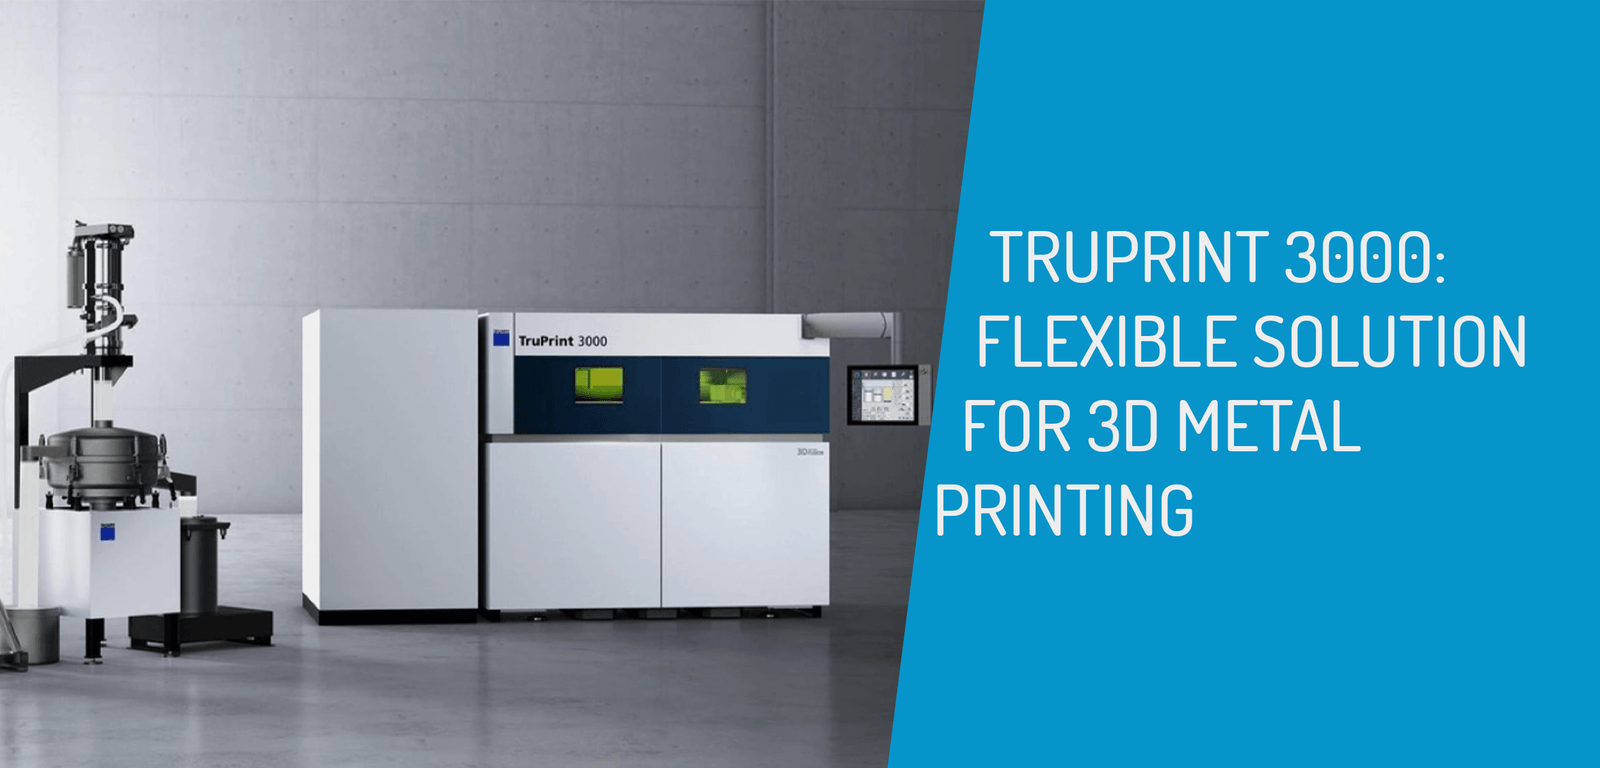 TruPrint 3000: Flexible Solution for Industrial 3D Printing